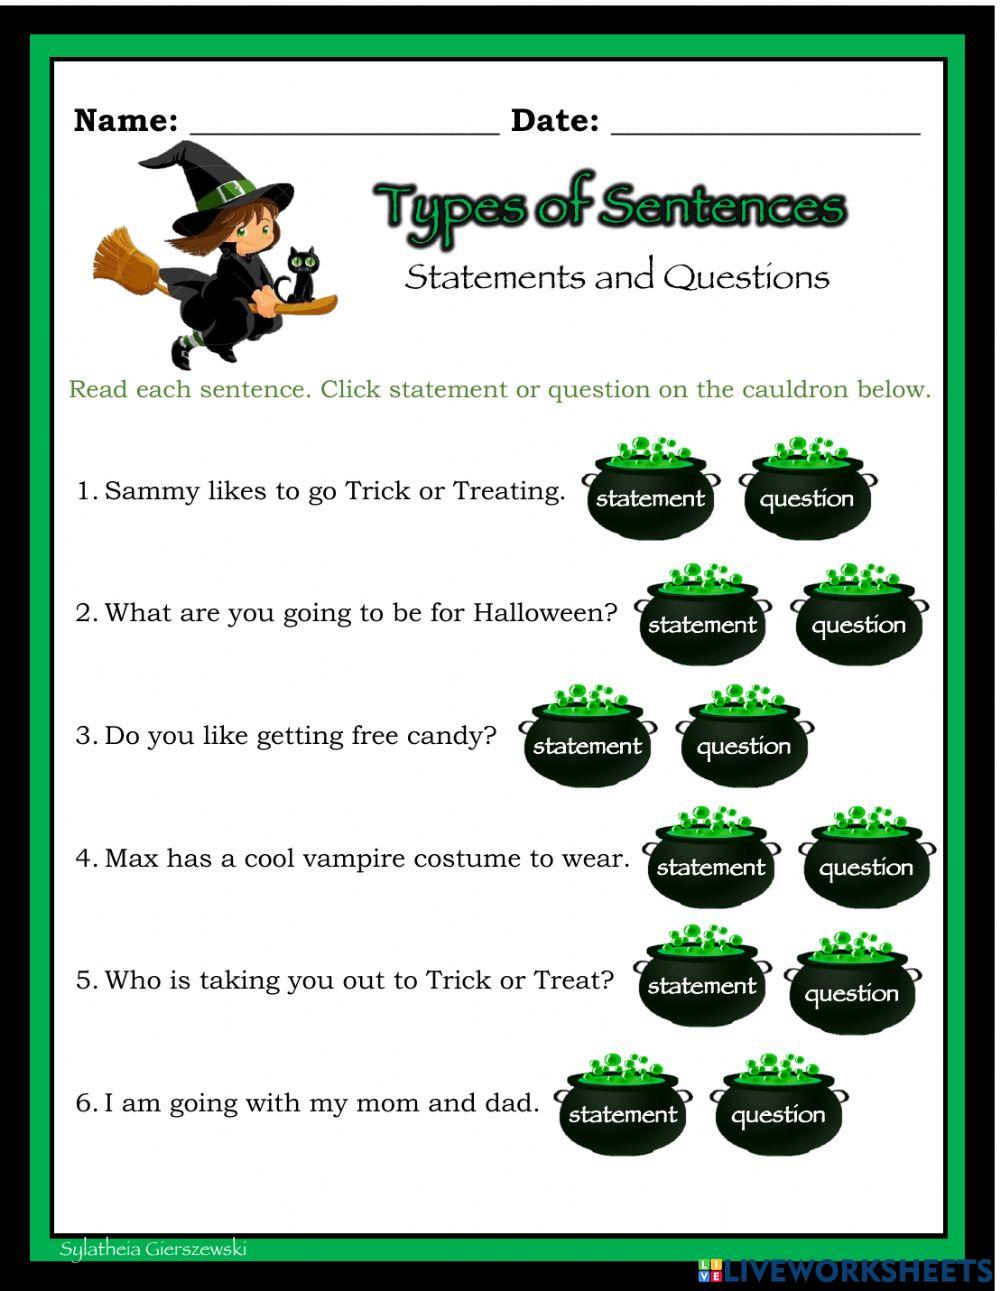 Types of Sentences (statement and question)